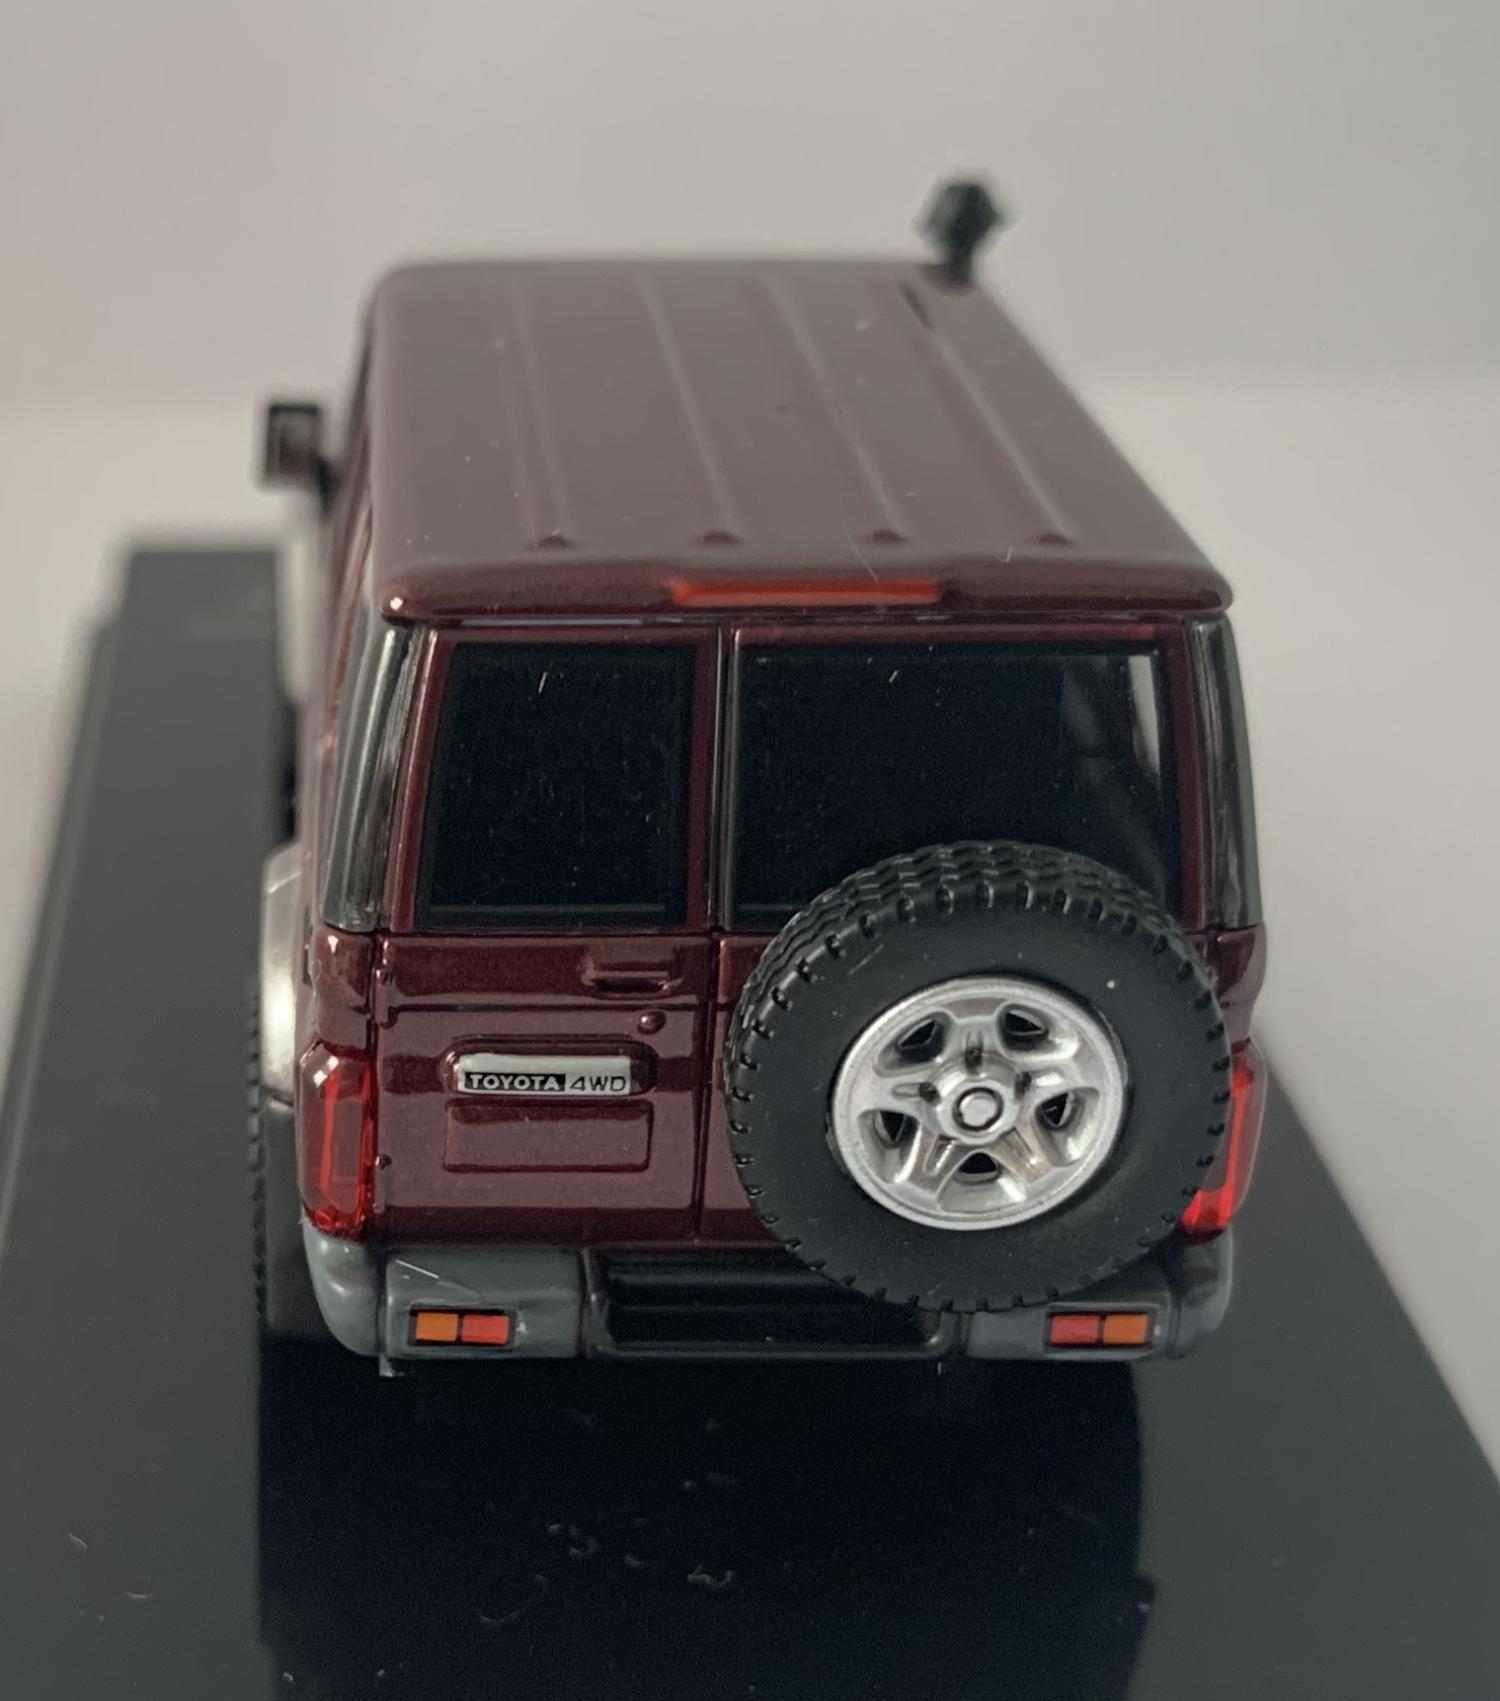 An excellent scale model of a Toyota Land Cruiser decorated in merlot red with silver wheels, spare wheel (not removable) on rear door and snorkel